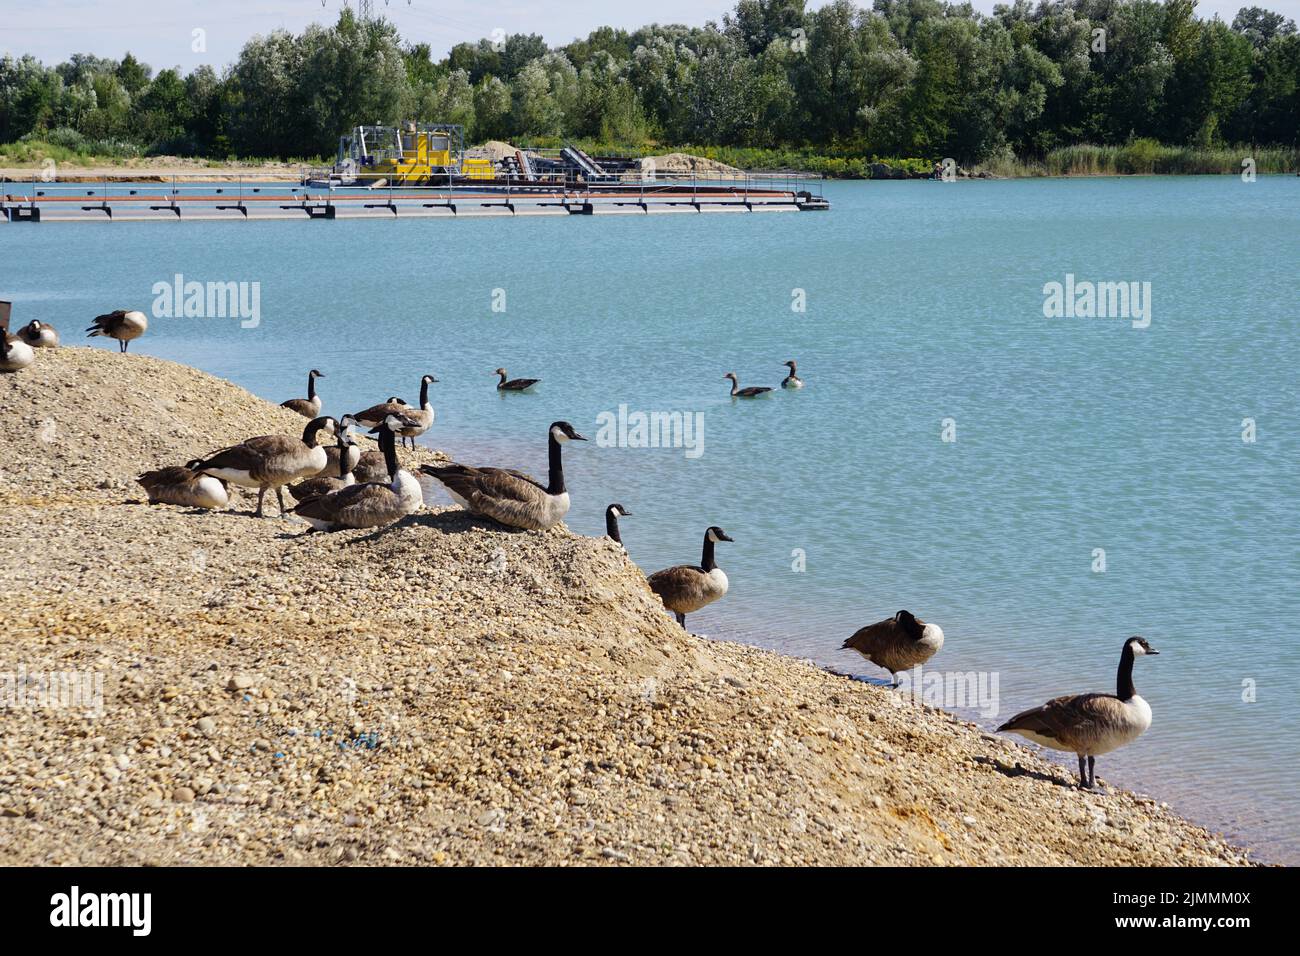 A flock of Canada geese (Branta canadensis) on a lakeshore Stock Photo